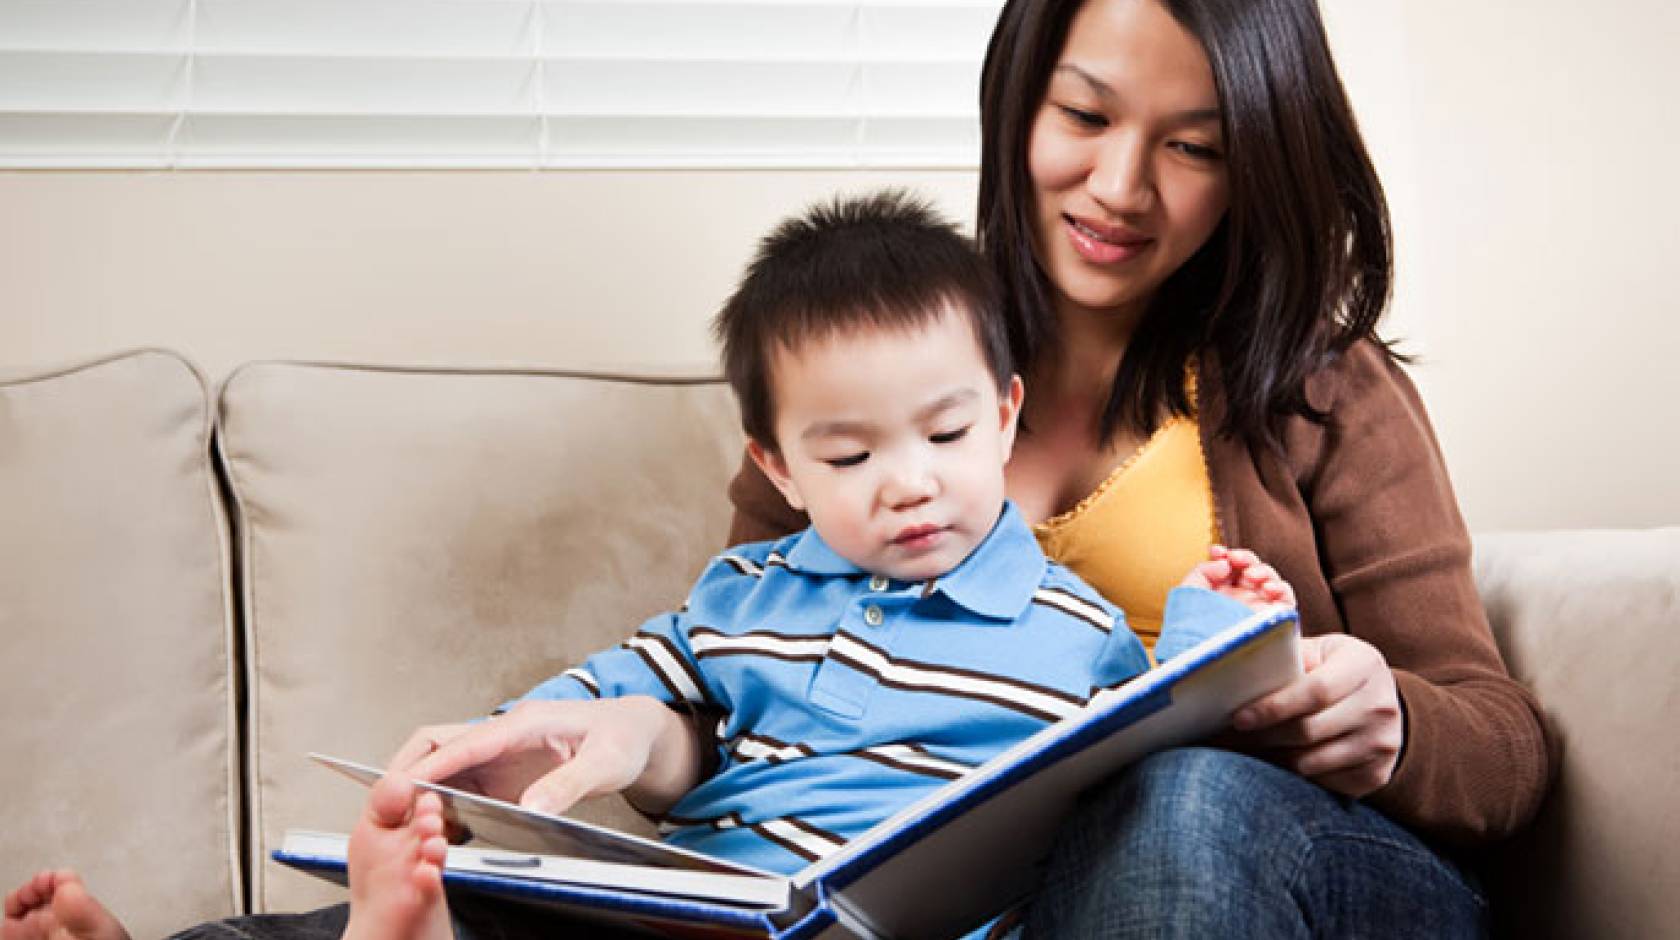 UC Merced in-home parenting study